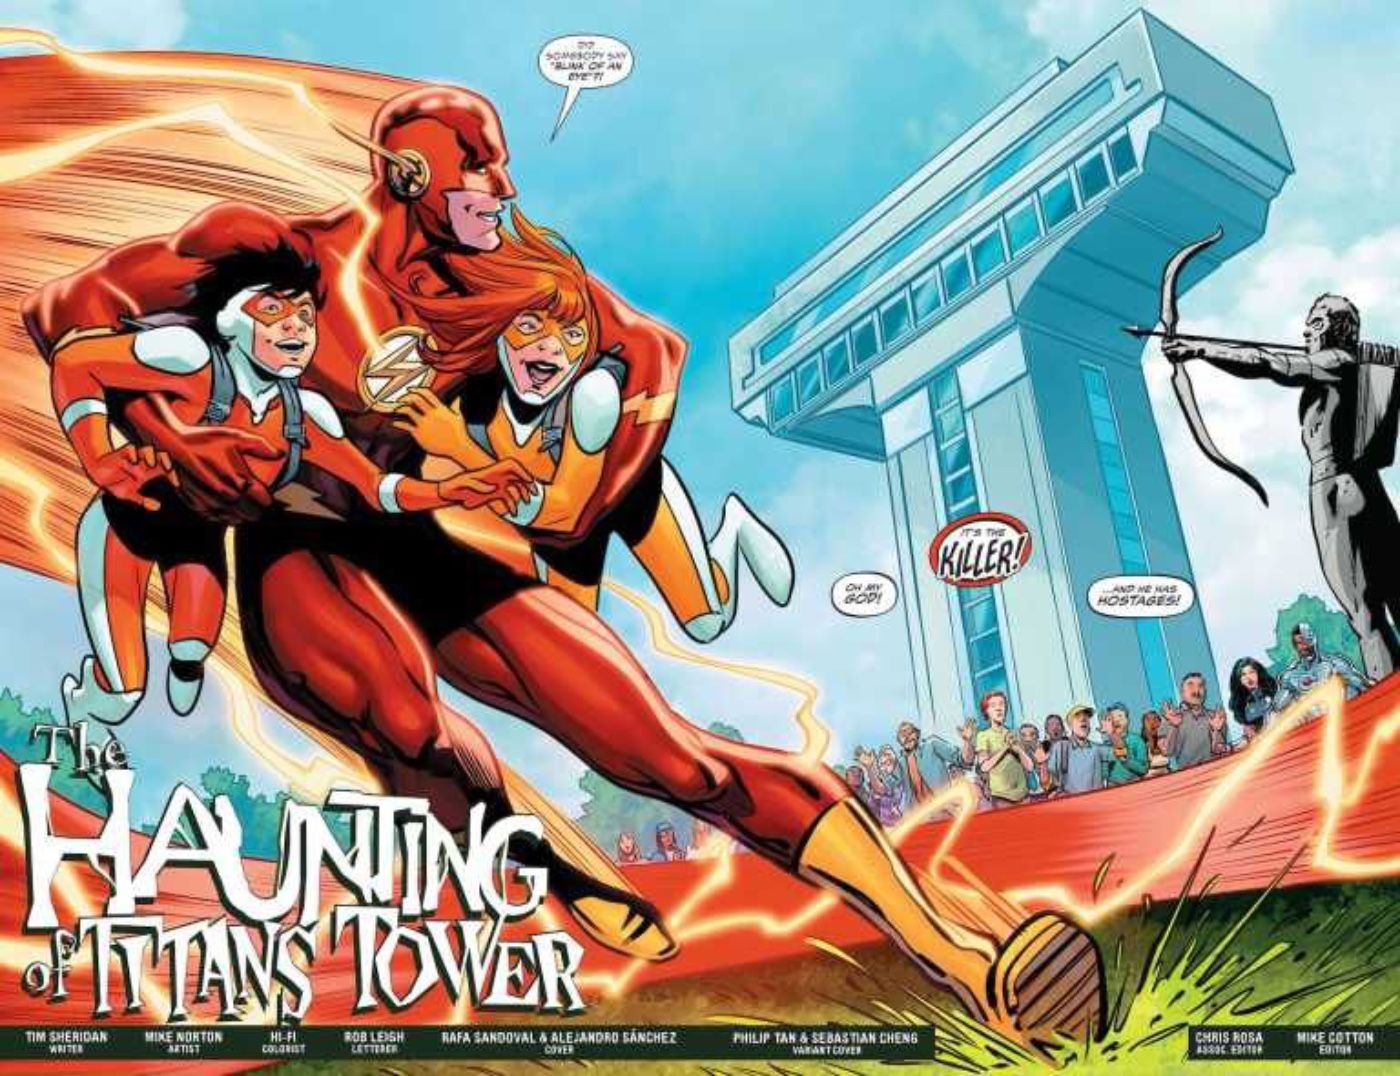 Teen Titans Academy 8 preview page, showing Wally West arriving at Titans Tower with his kids